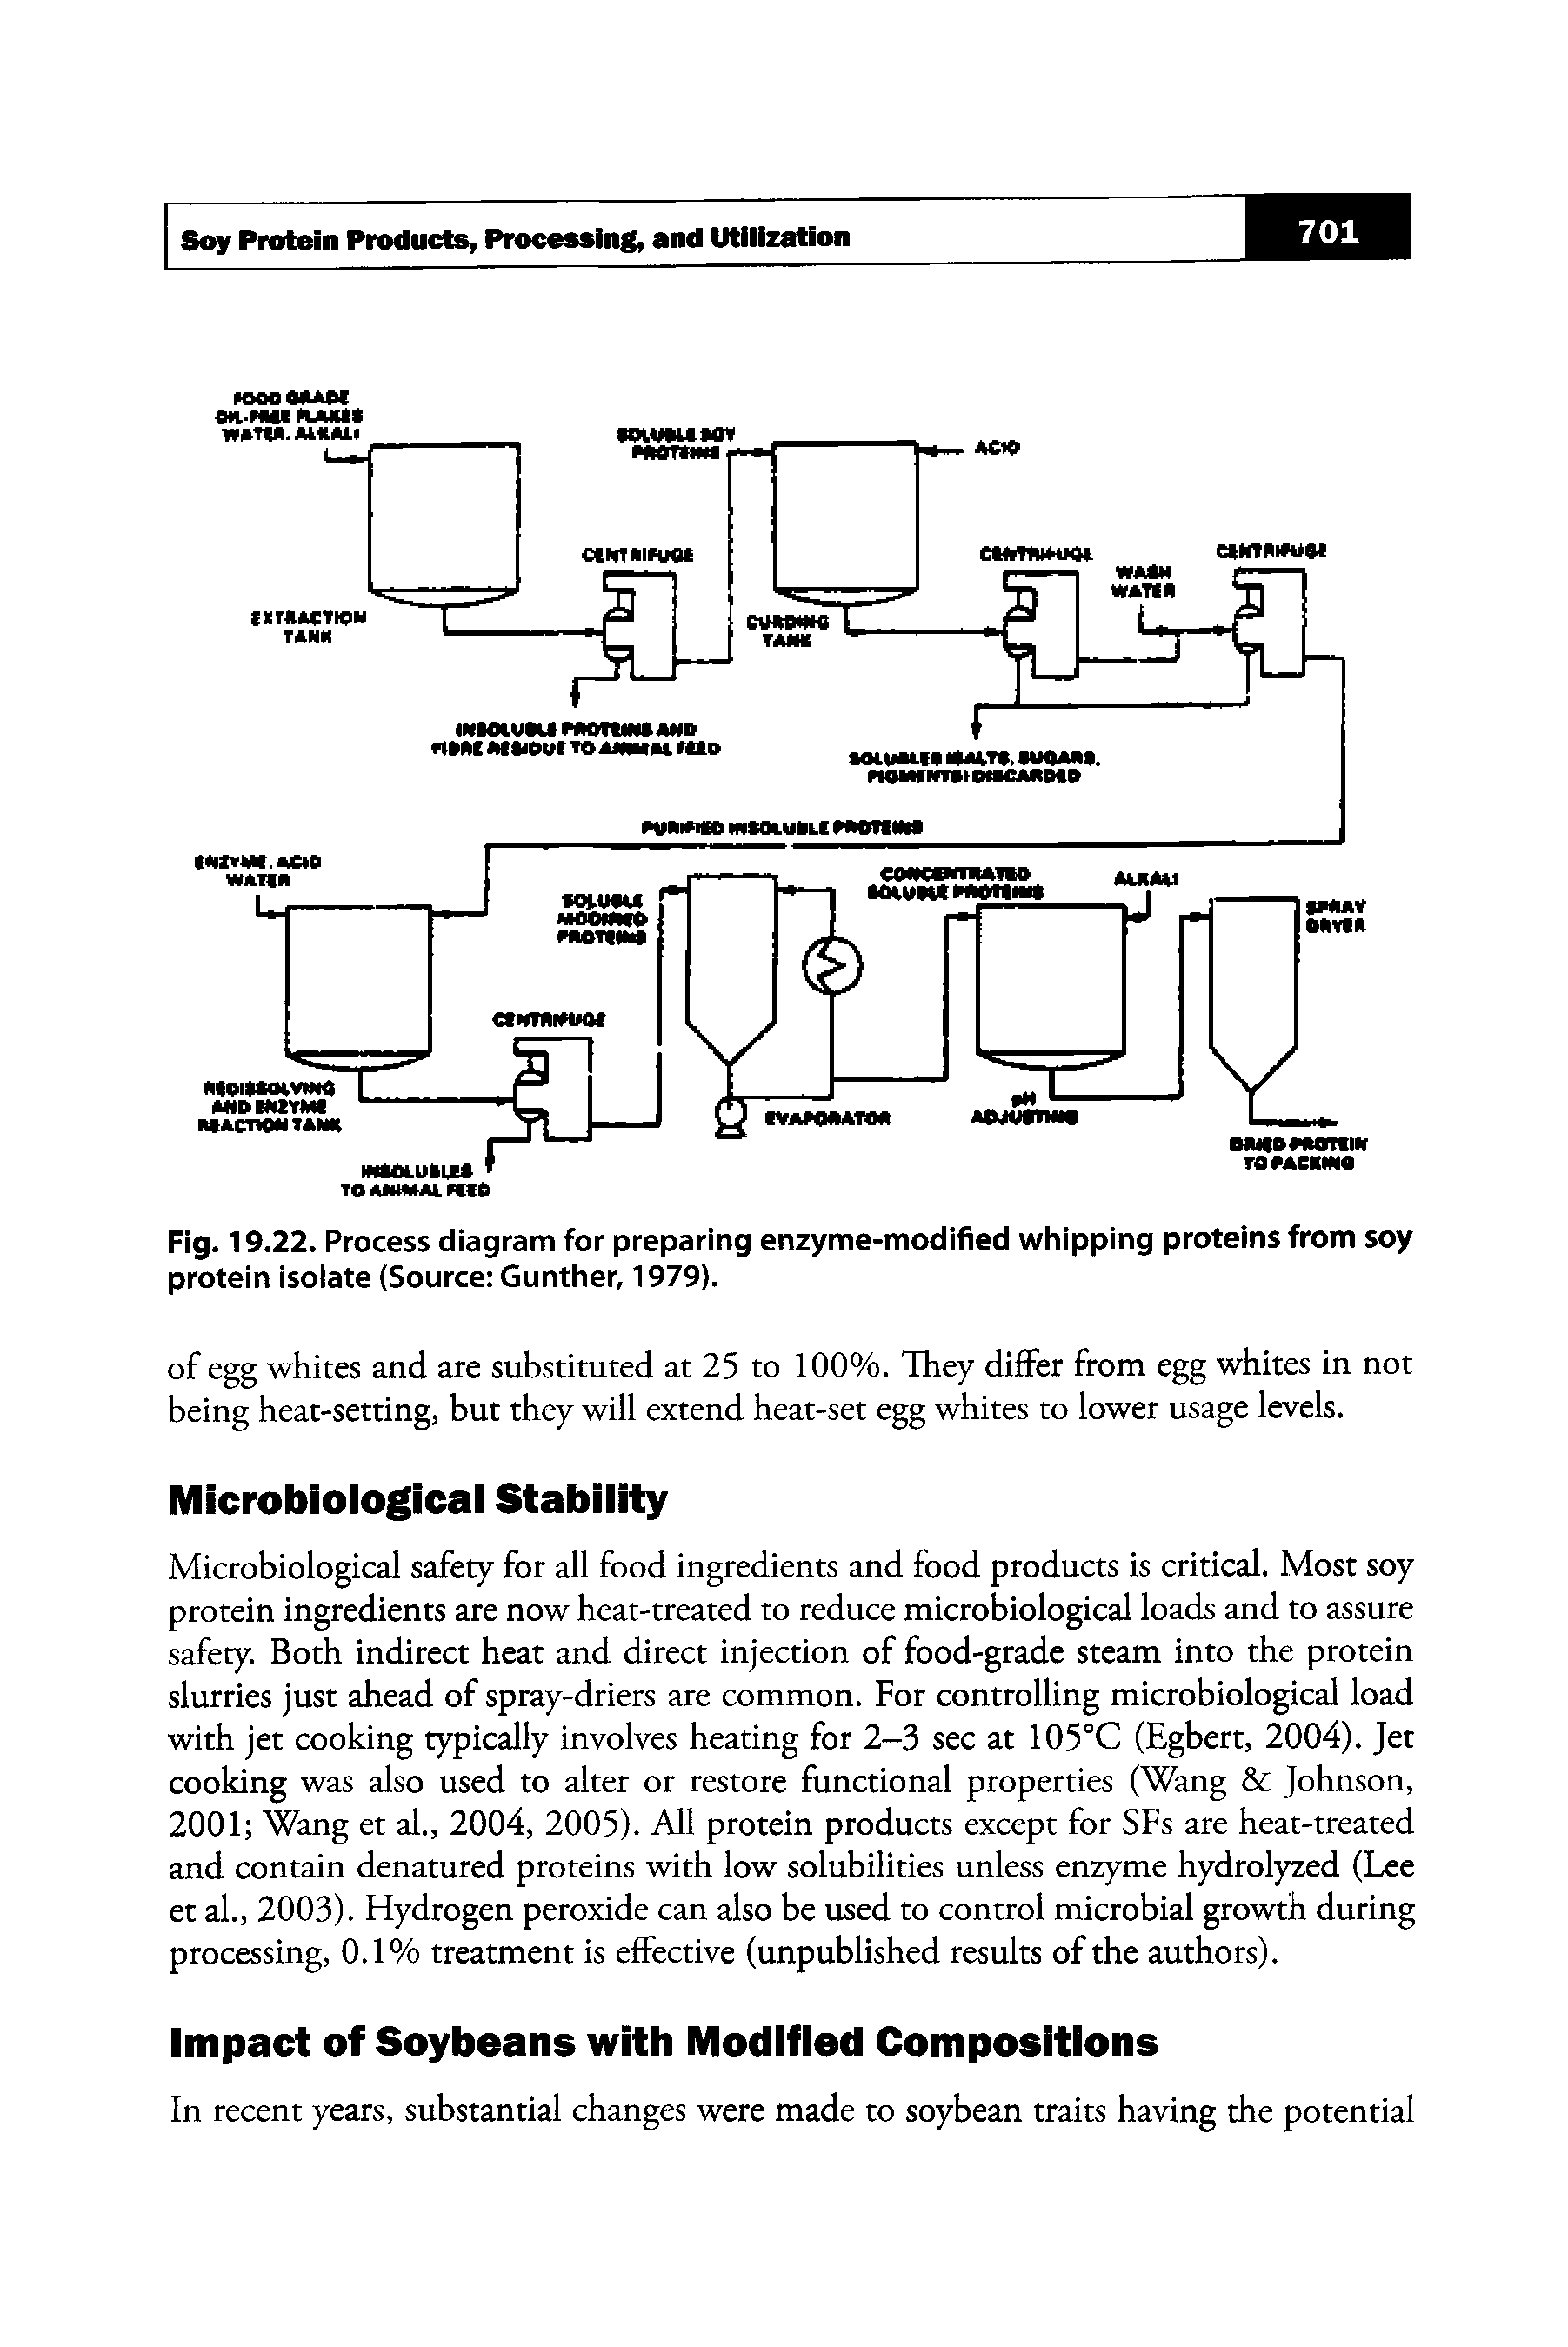 Fig. 19.22. Process diagram for preparing enzyme-modified whipping proteins from soy protein isolate (Source Gunther, 1979).